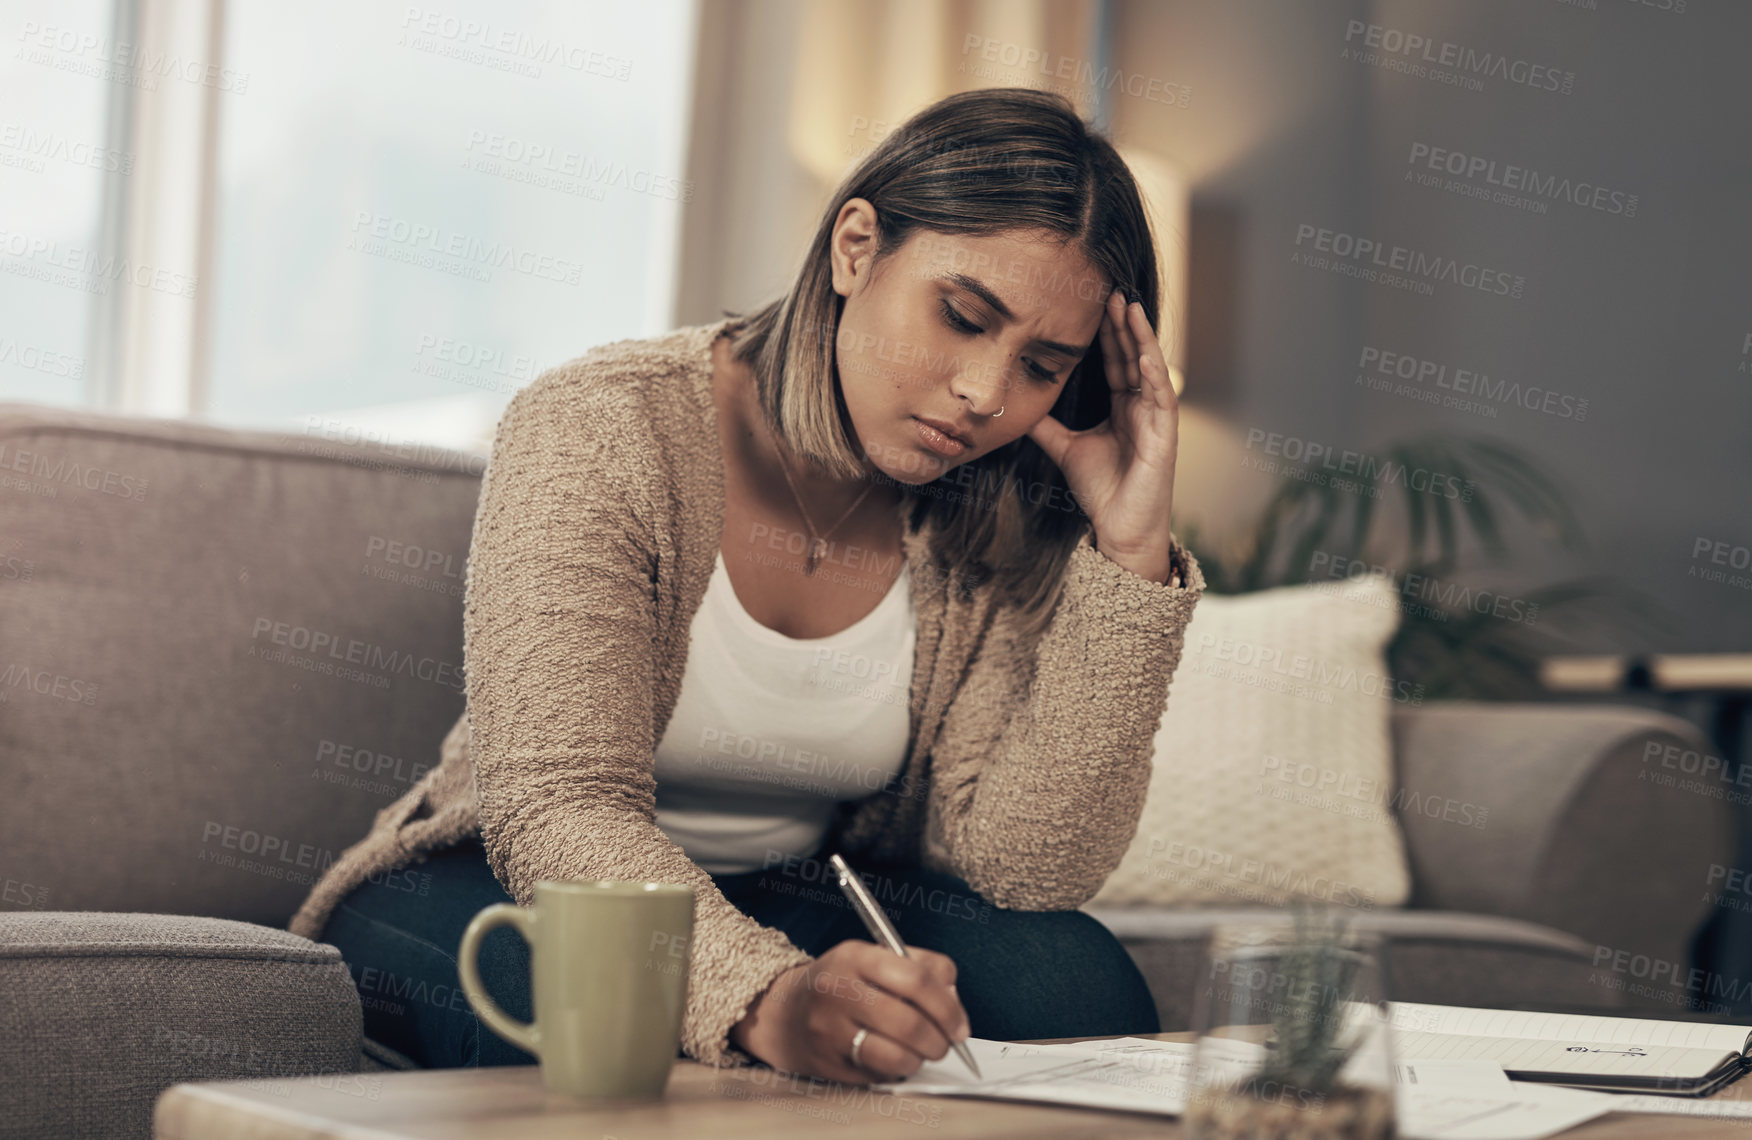 Buy stock photo Shot of a young woman looking stressed while going over paperwork at home